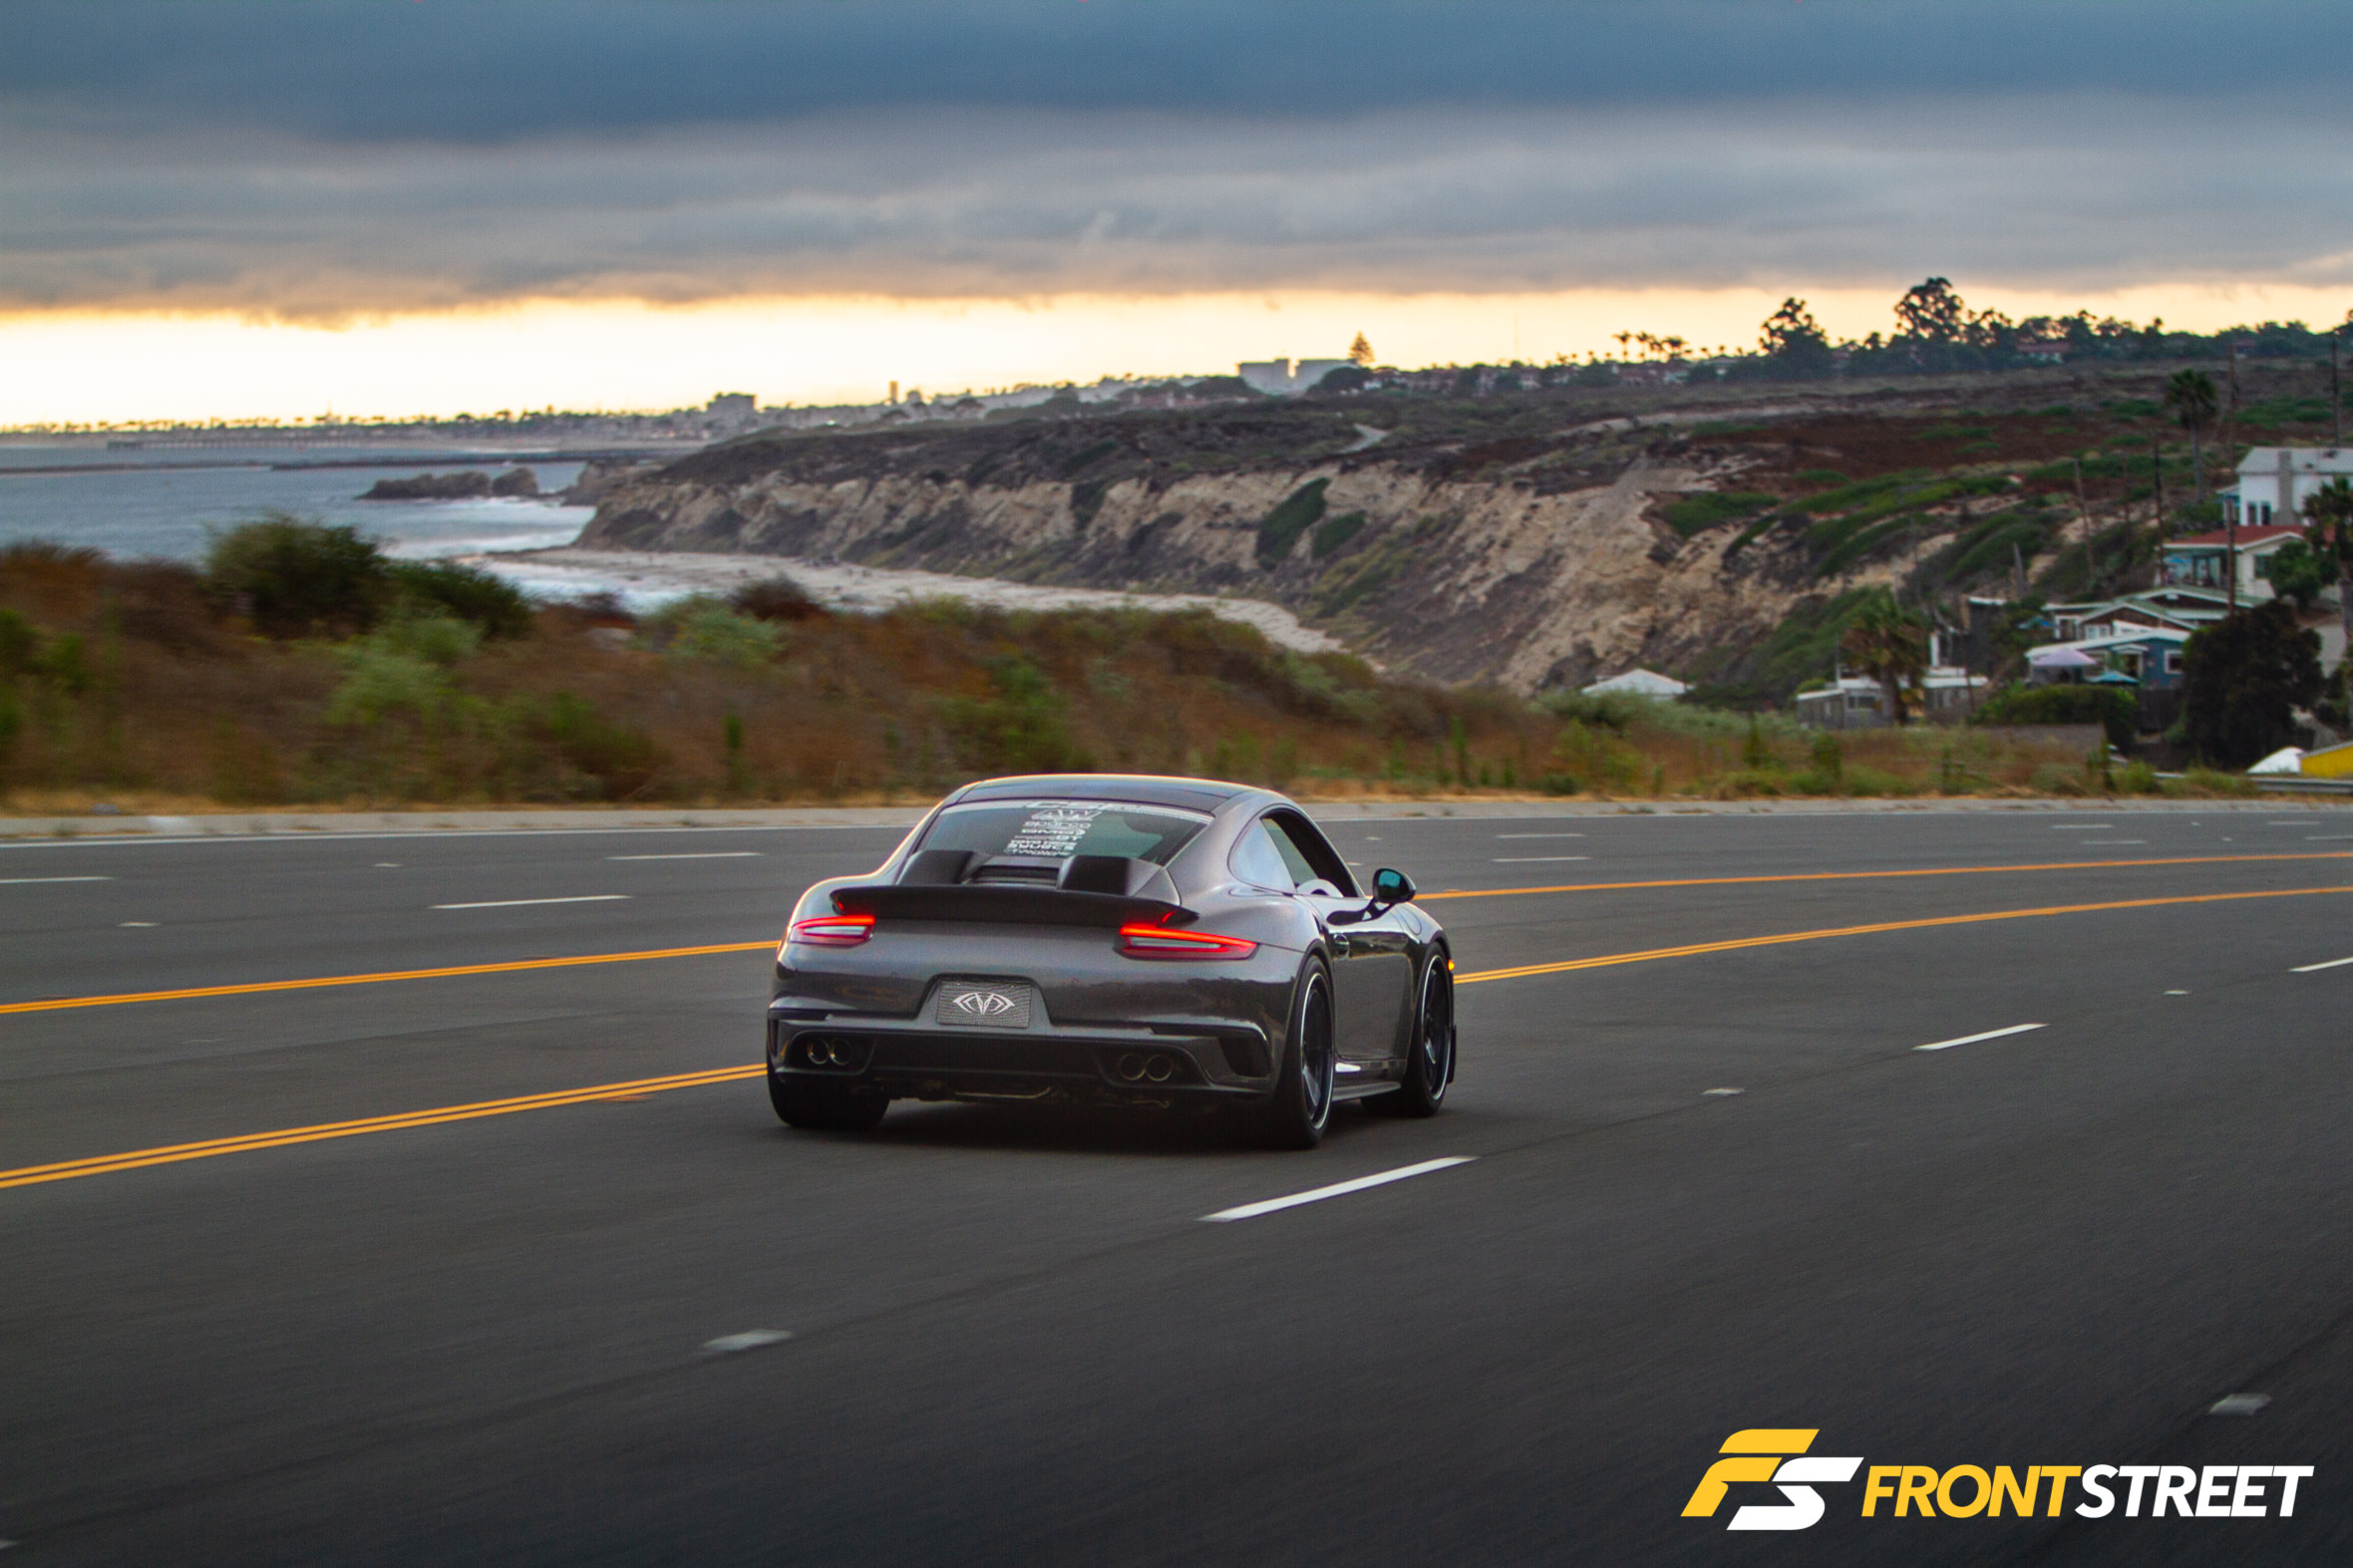 This 2014 Porsche 911 Turbo S Takes Care Of Unfinished Business